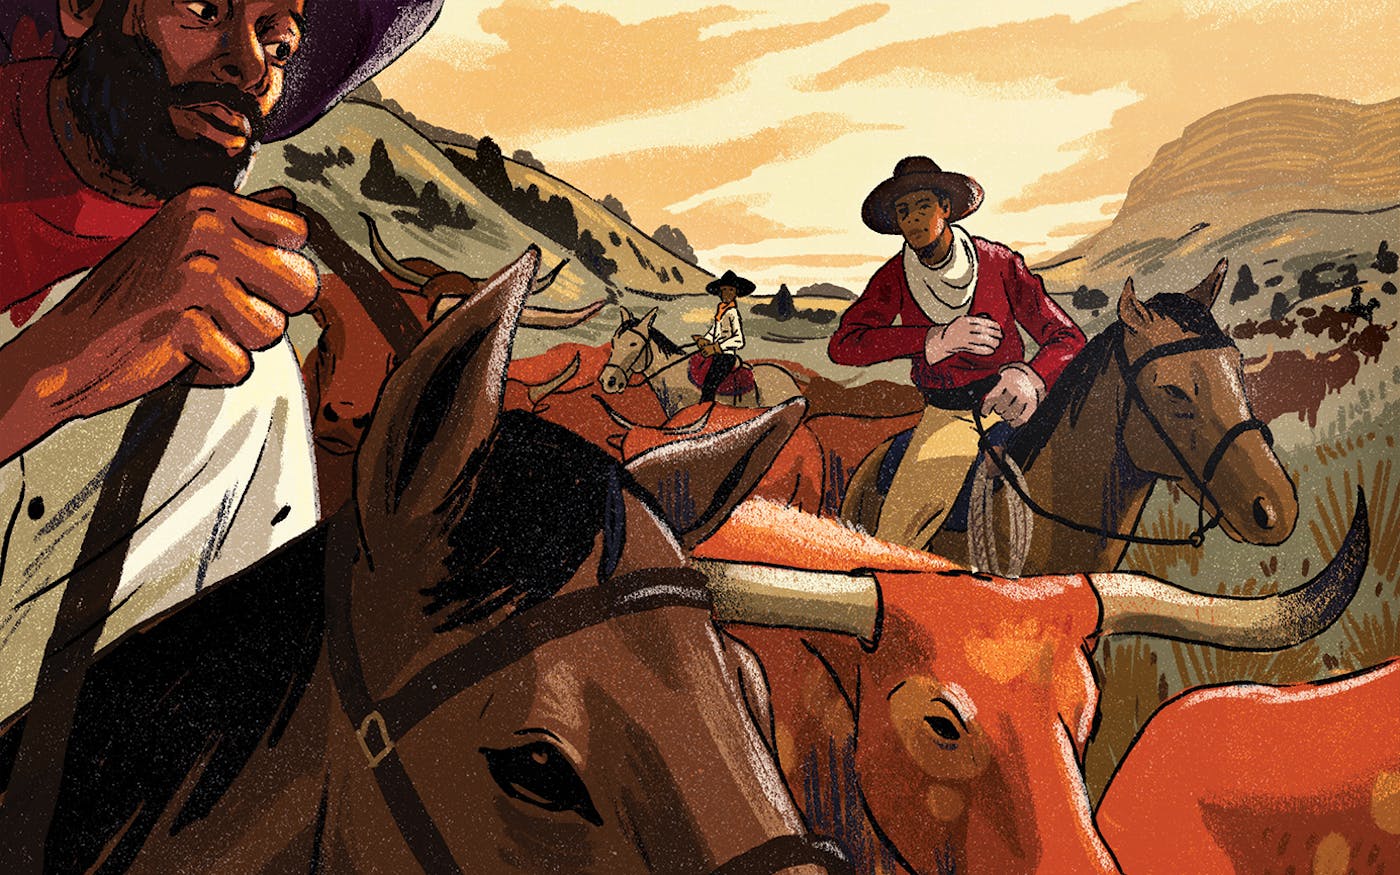 Christian Ladies Horse Animal Sex - Through a Historic Trail Ride, Black Cowboys and Cowgirls Take Ownership of  Their Role in History â€“ Texas Monthly